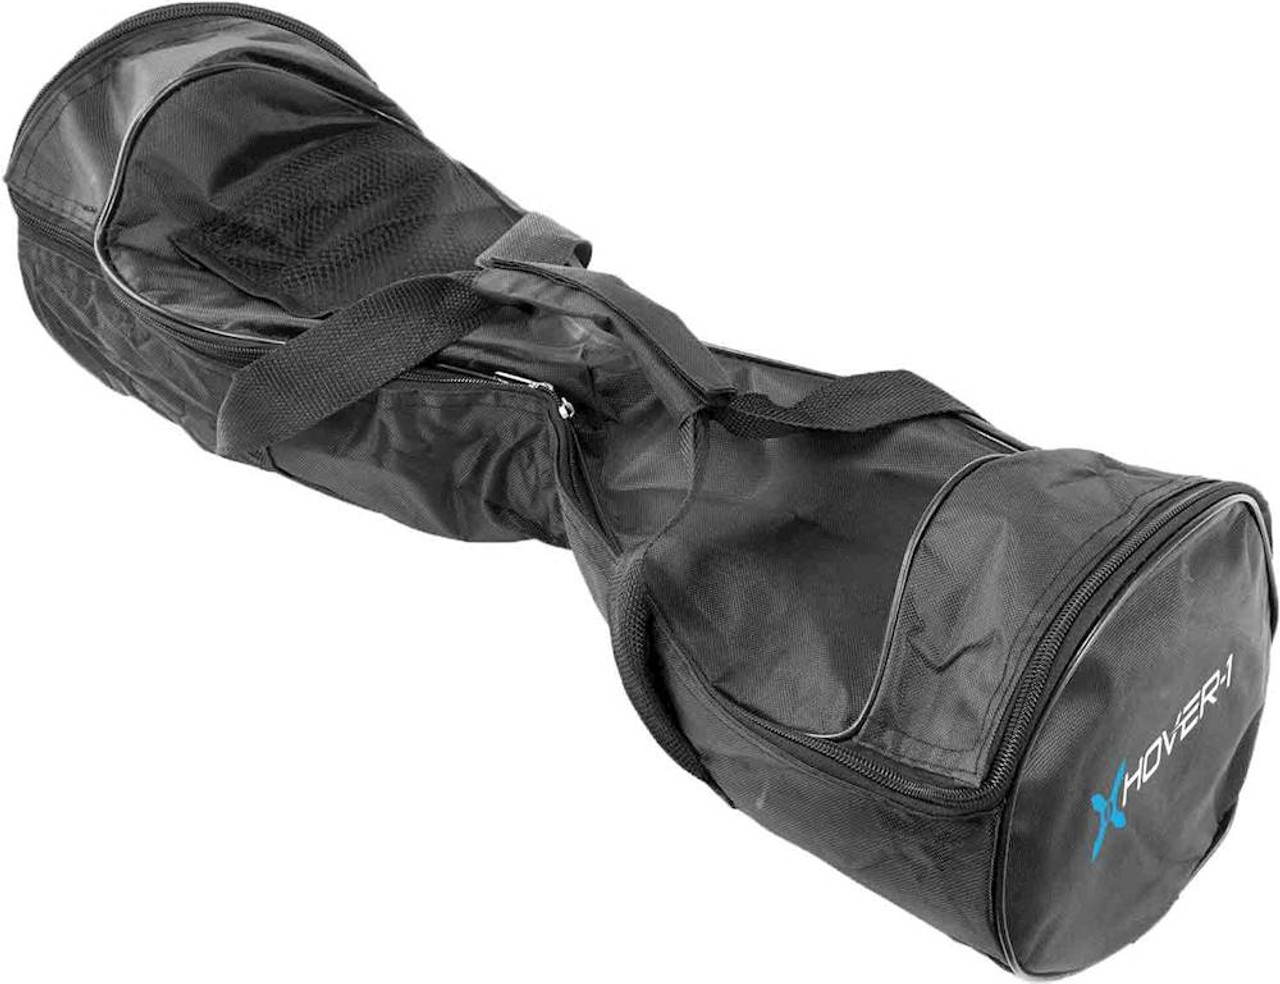 Hover-1 - Nylon Zip Carrying Case for 6.5" Self-Balancing Scooter